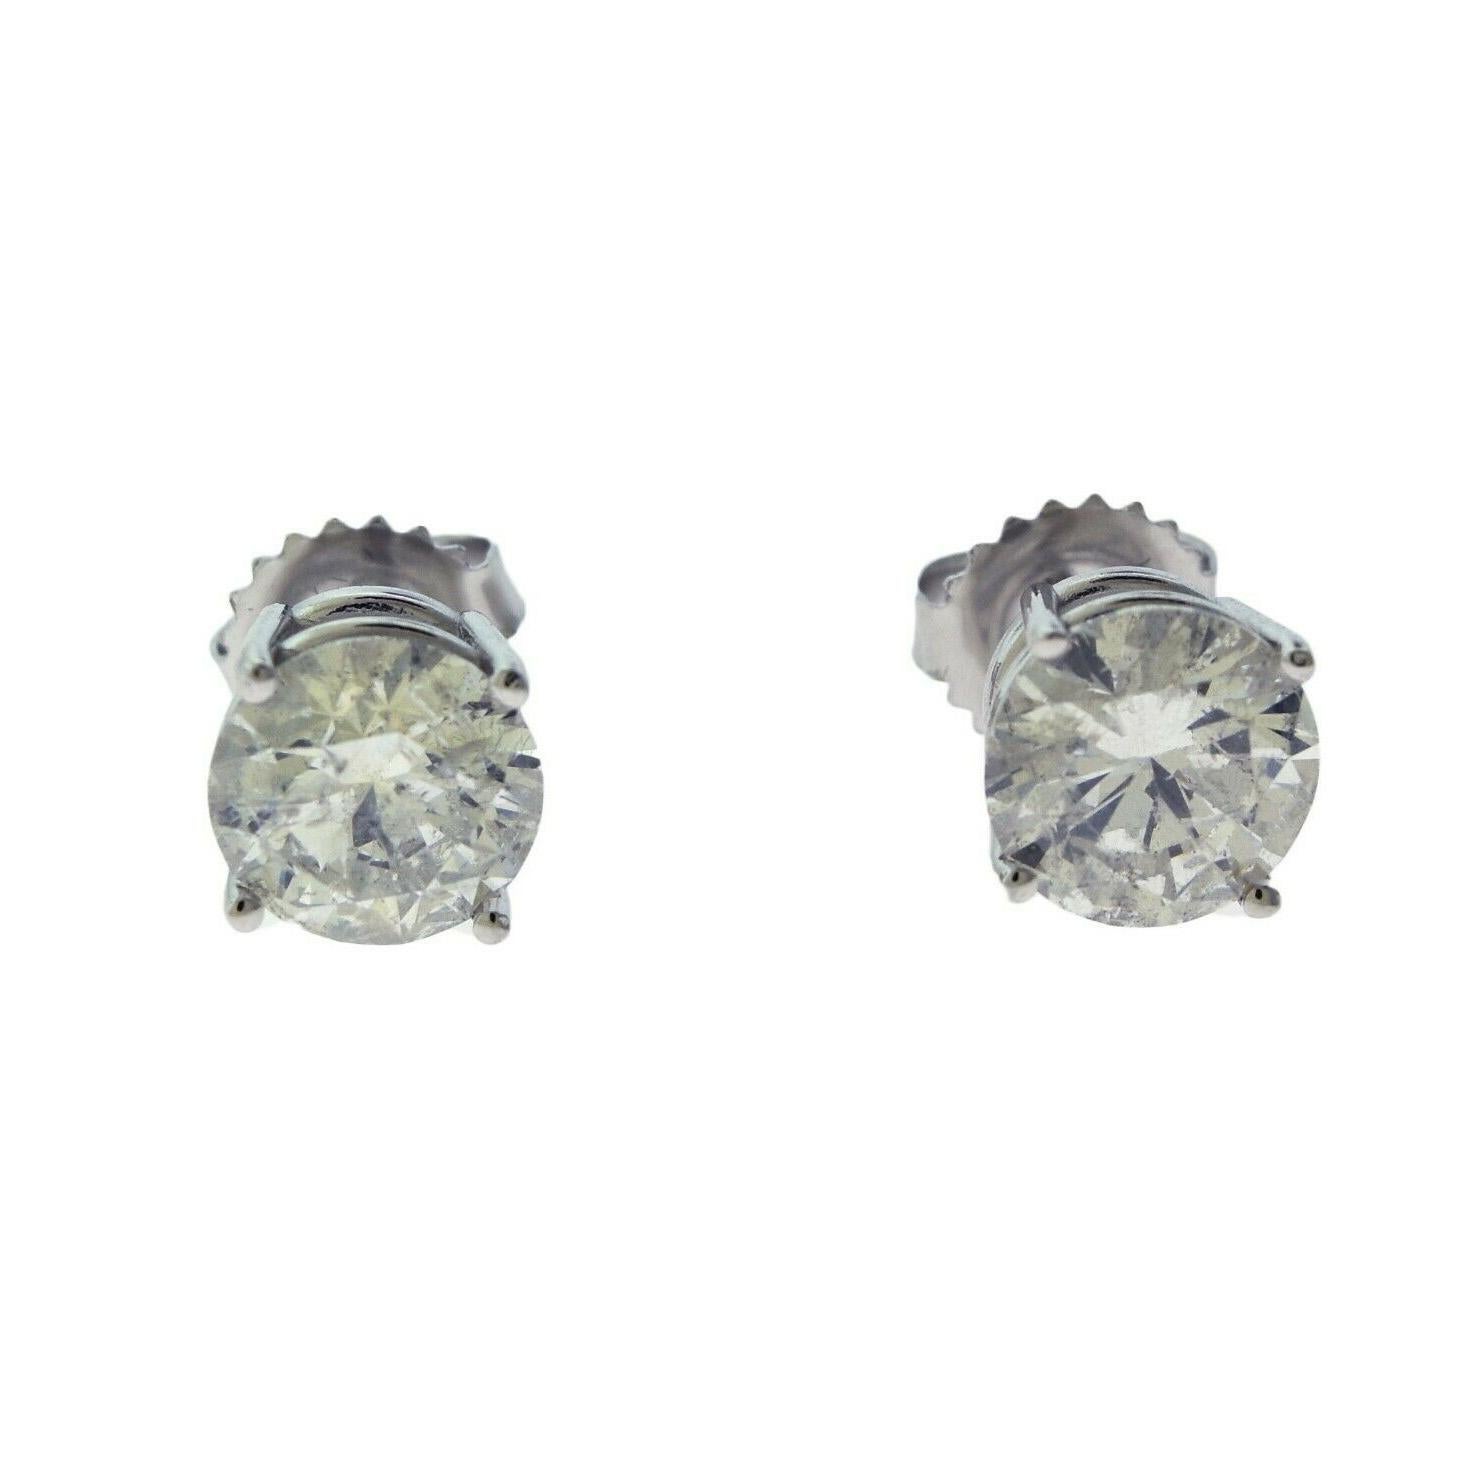 Brilliance Jewels, Miami
Questions? Call Us Anytime!
786,482,8100

Style: Studs

Metal: White Gold

Metal Purity: 18k

Stones: Round Brilliant Diamonds

Total Carat Weight: 3,01

Diamond  Color: G - H

Diamond  Clarity:SI3

Total Item Weight